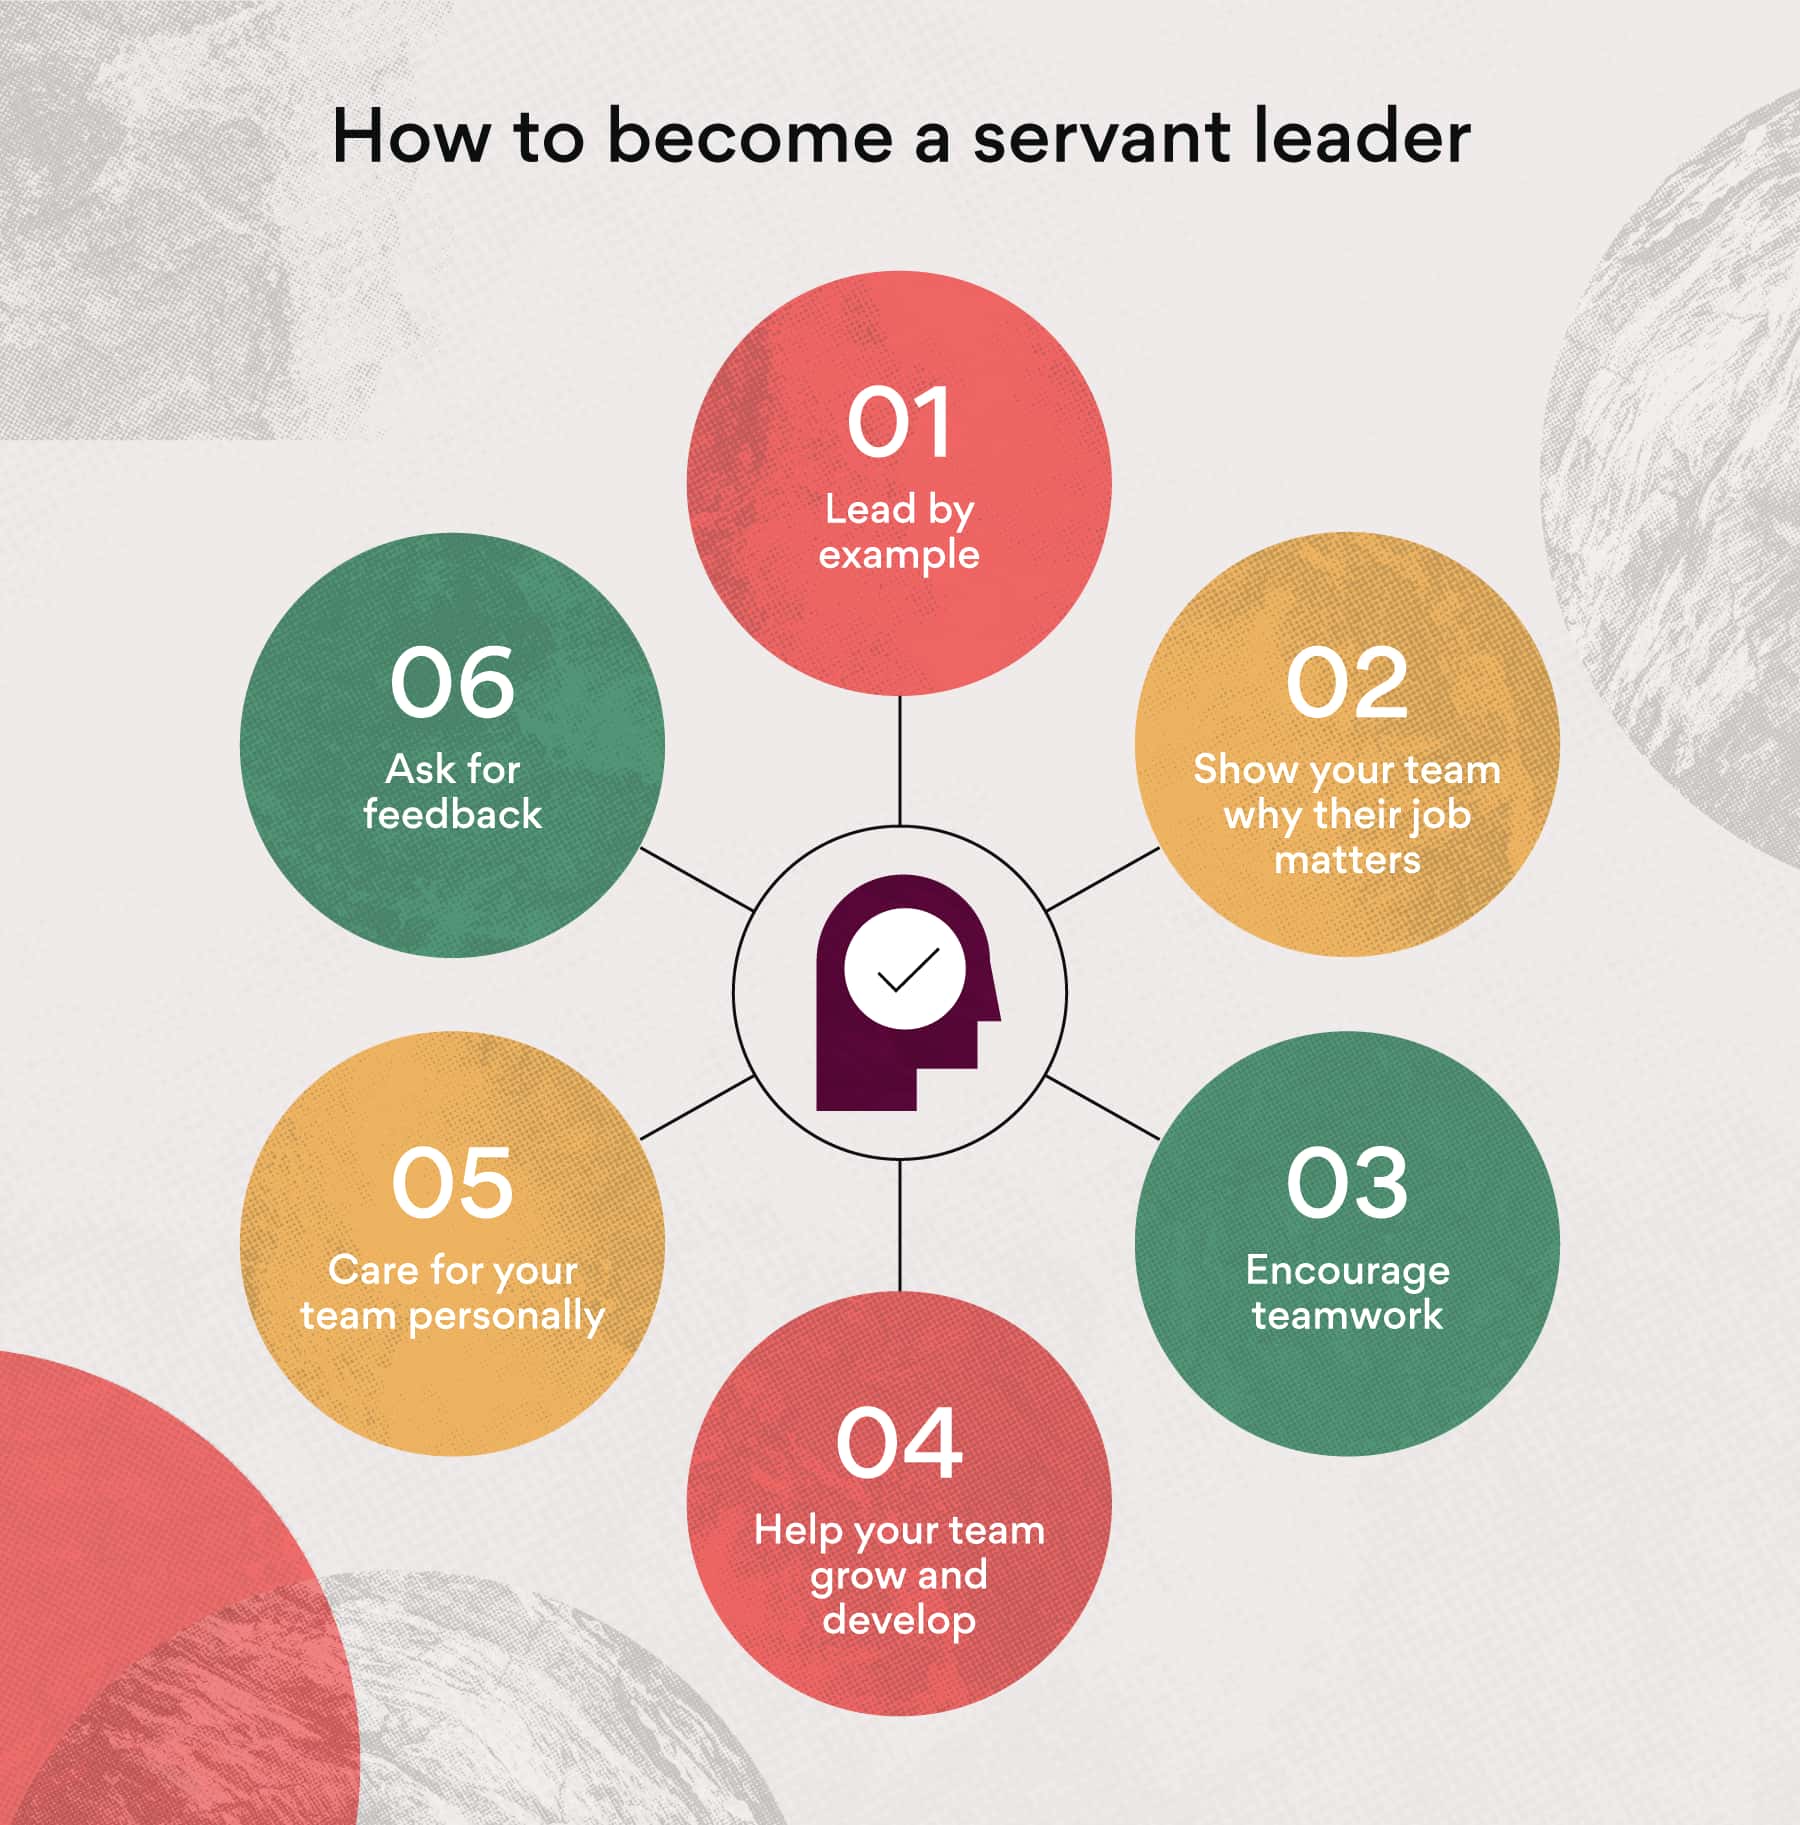 [inline illustration] How to become a servant leader (infographic)